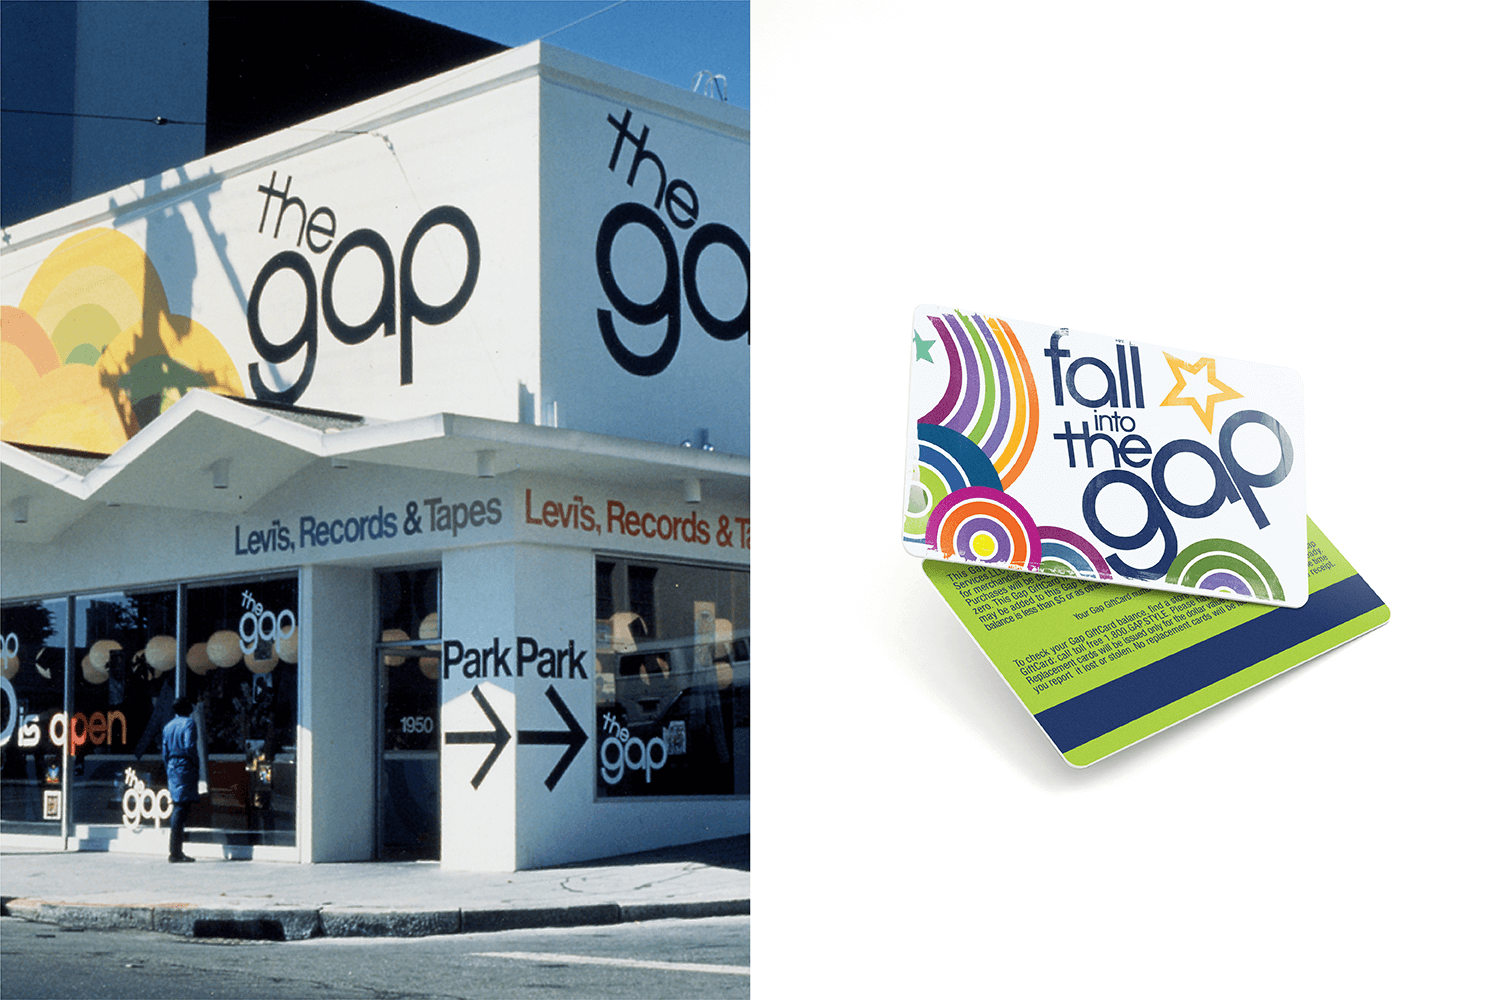 The original Gap location founded in 1969 as a jeans and record store and gift card design inspired by the Gap's original branding.